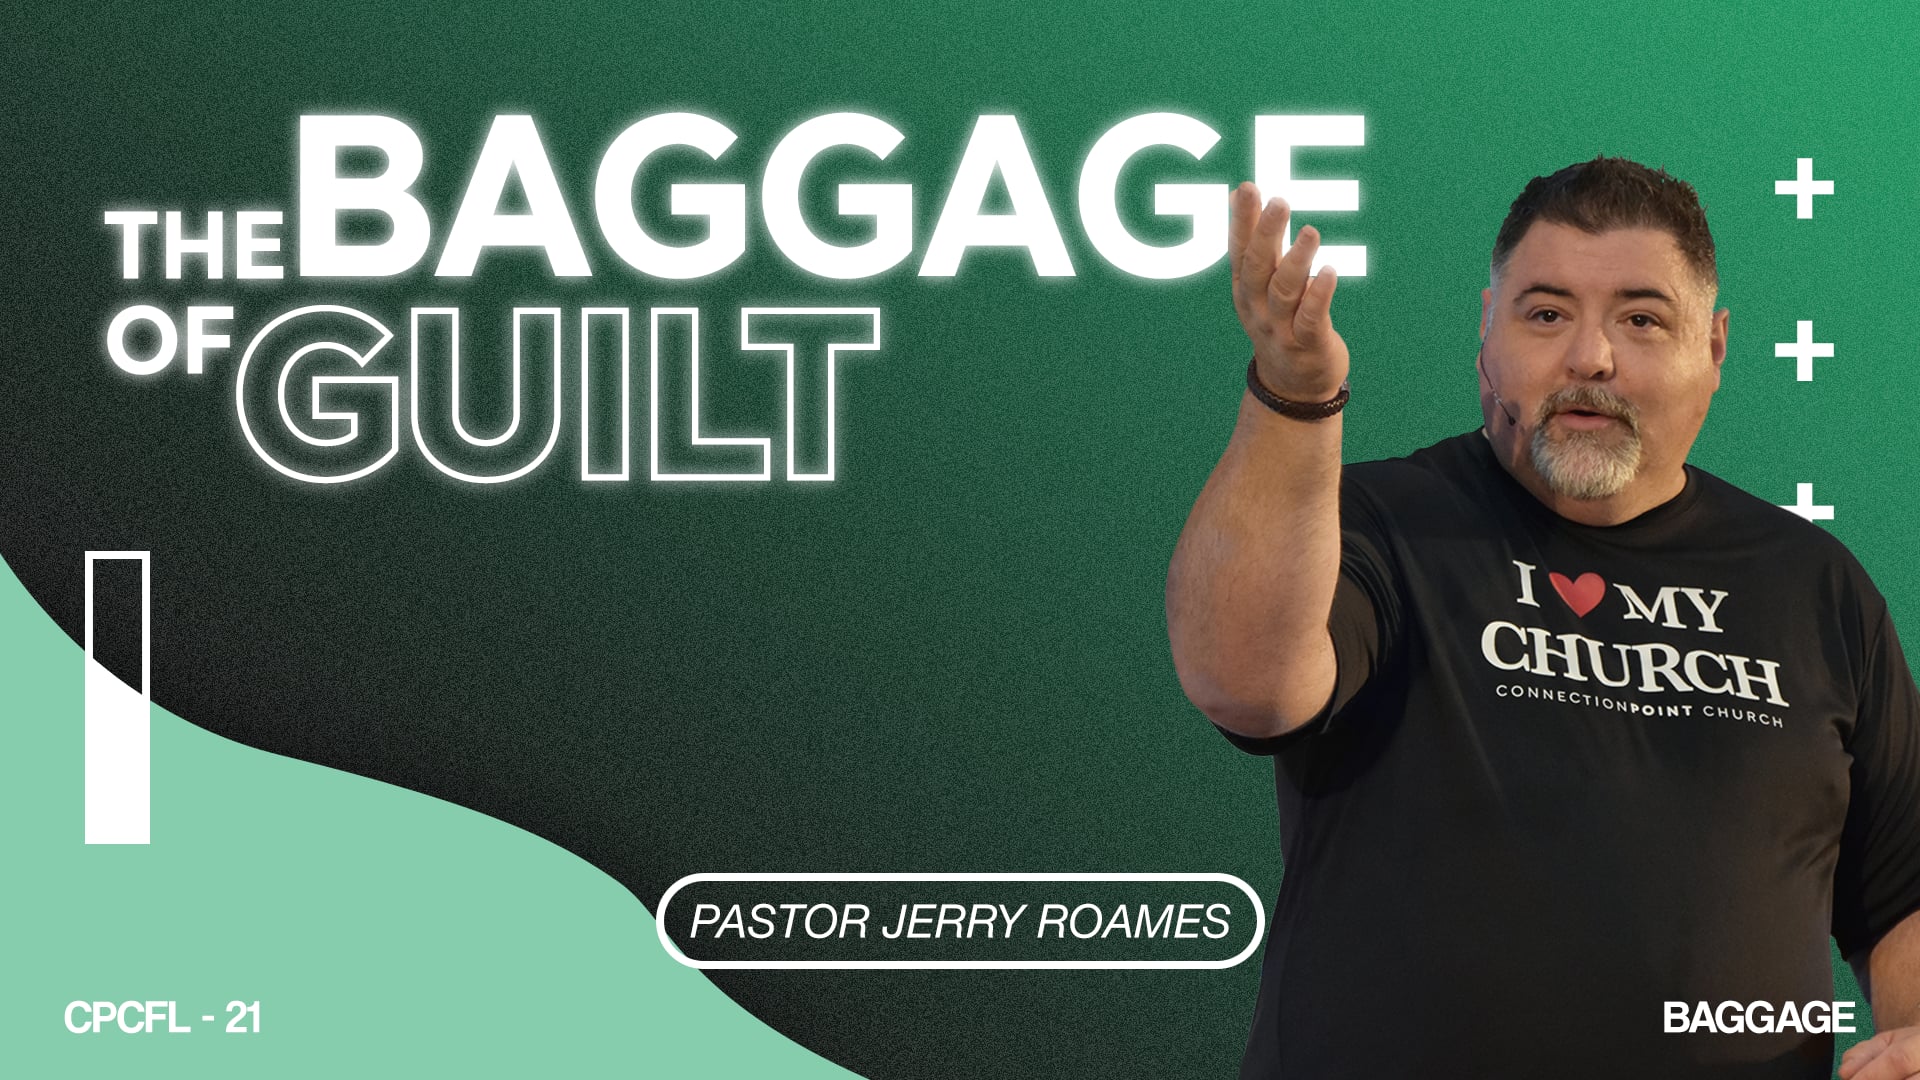 Baggage: The Baggage of Guilt